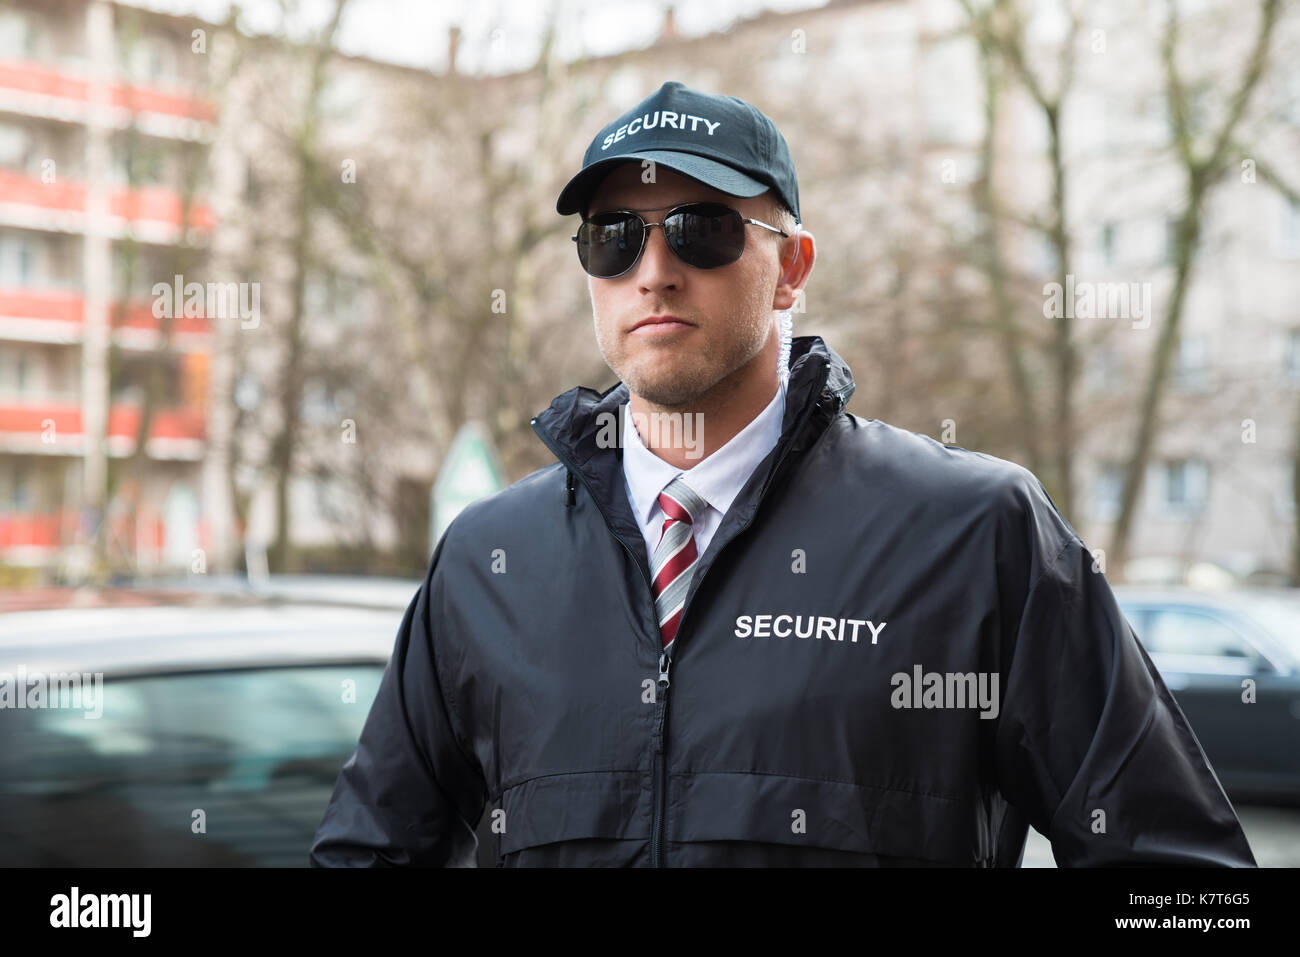 Portrait Of Young Security Guard Wearing Black Uniform And Glasses Stock Photo